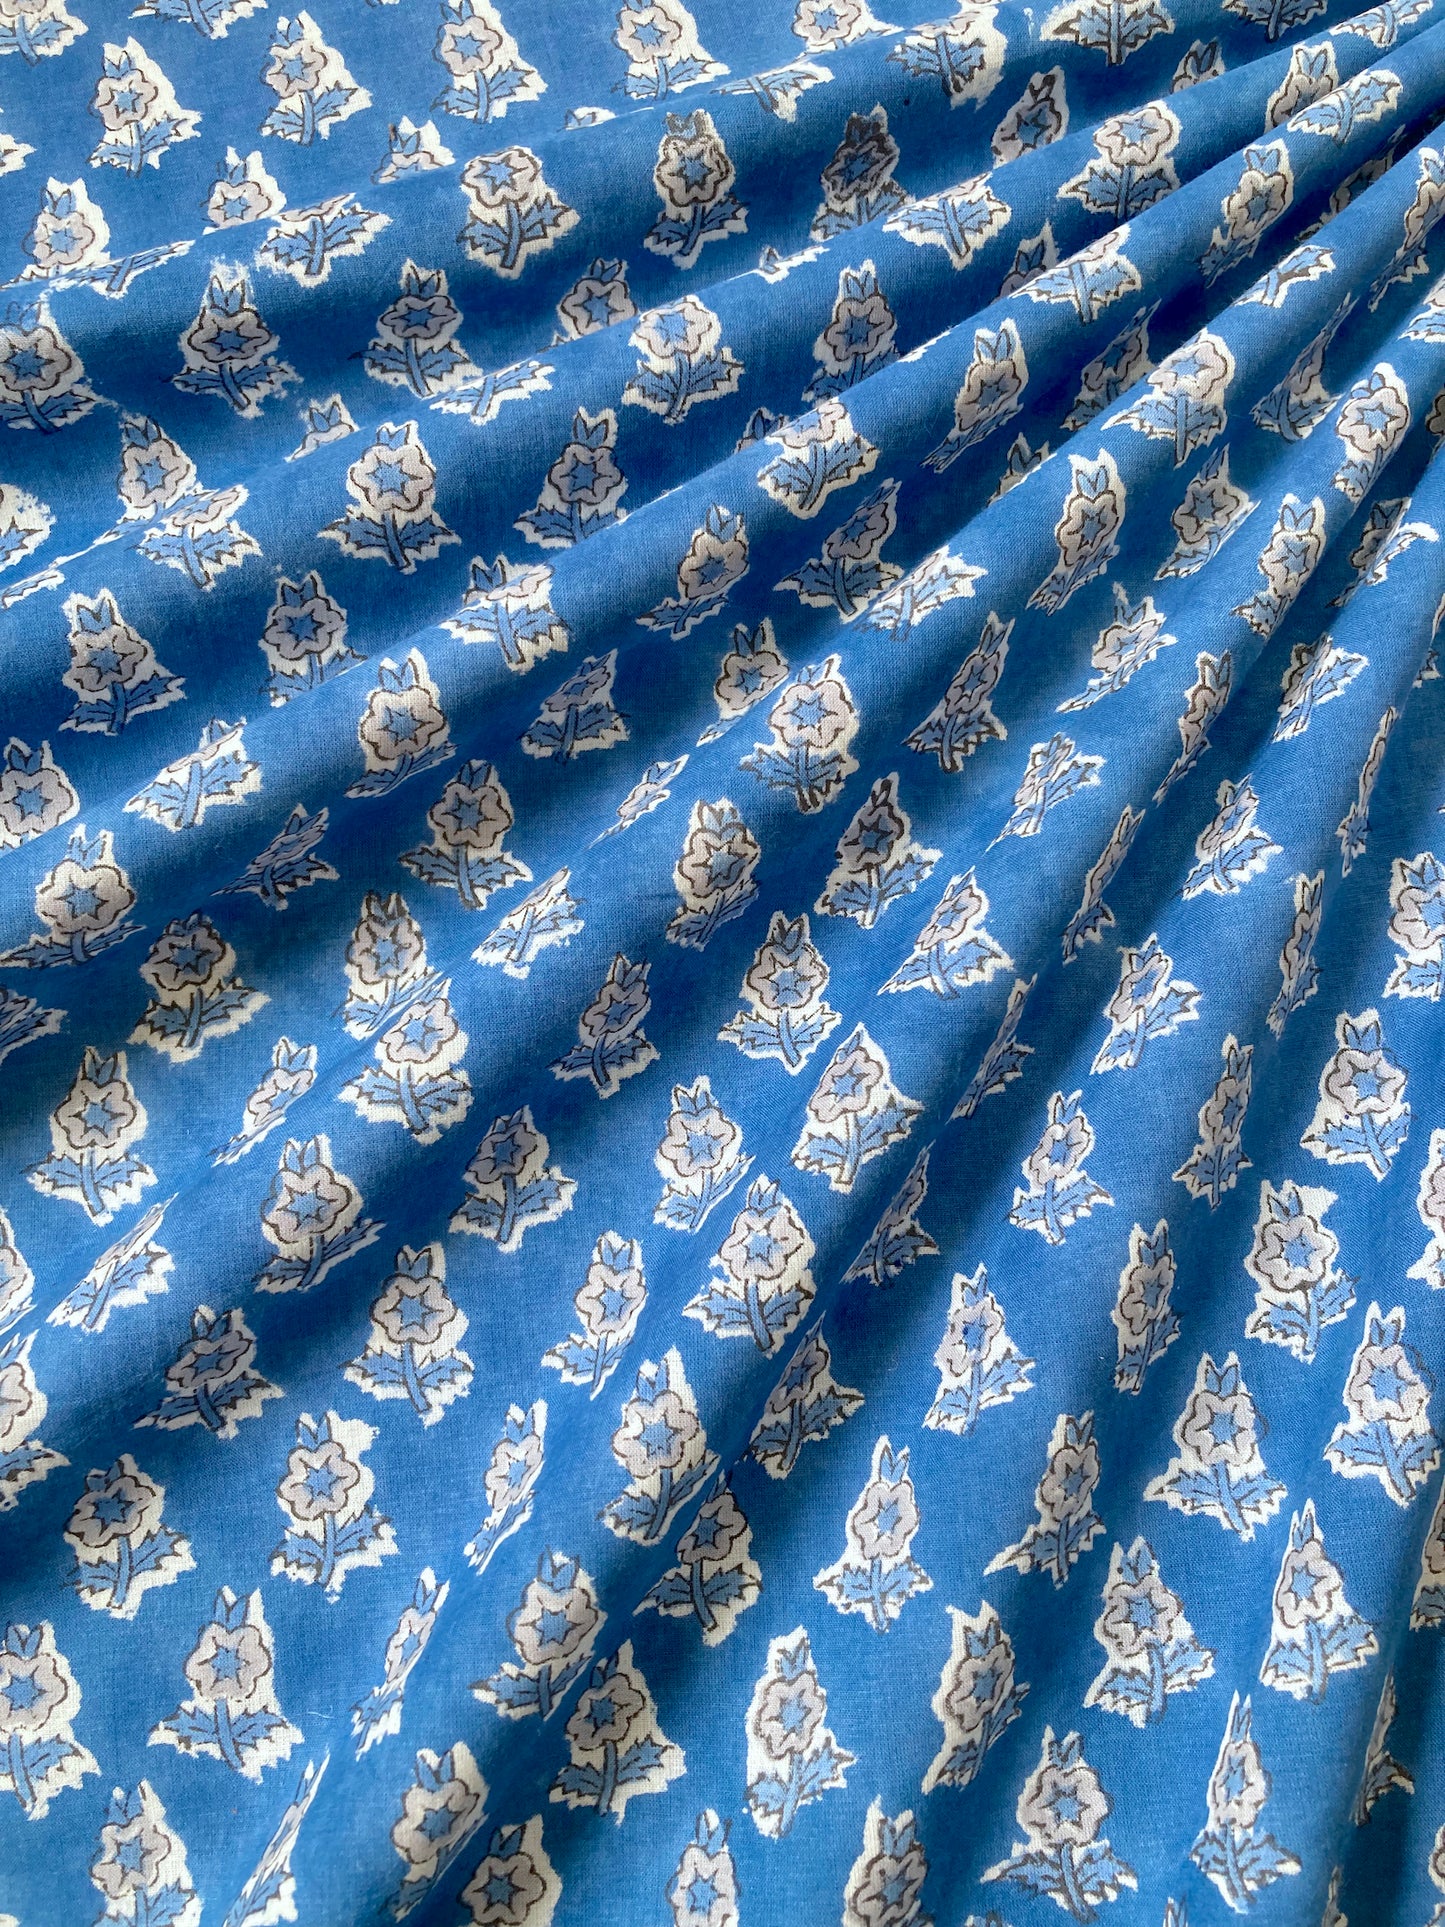 India Hand Block Floral Printed Fabric Blue #207-1